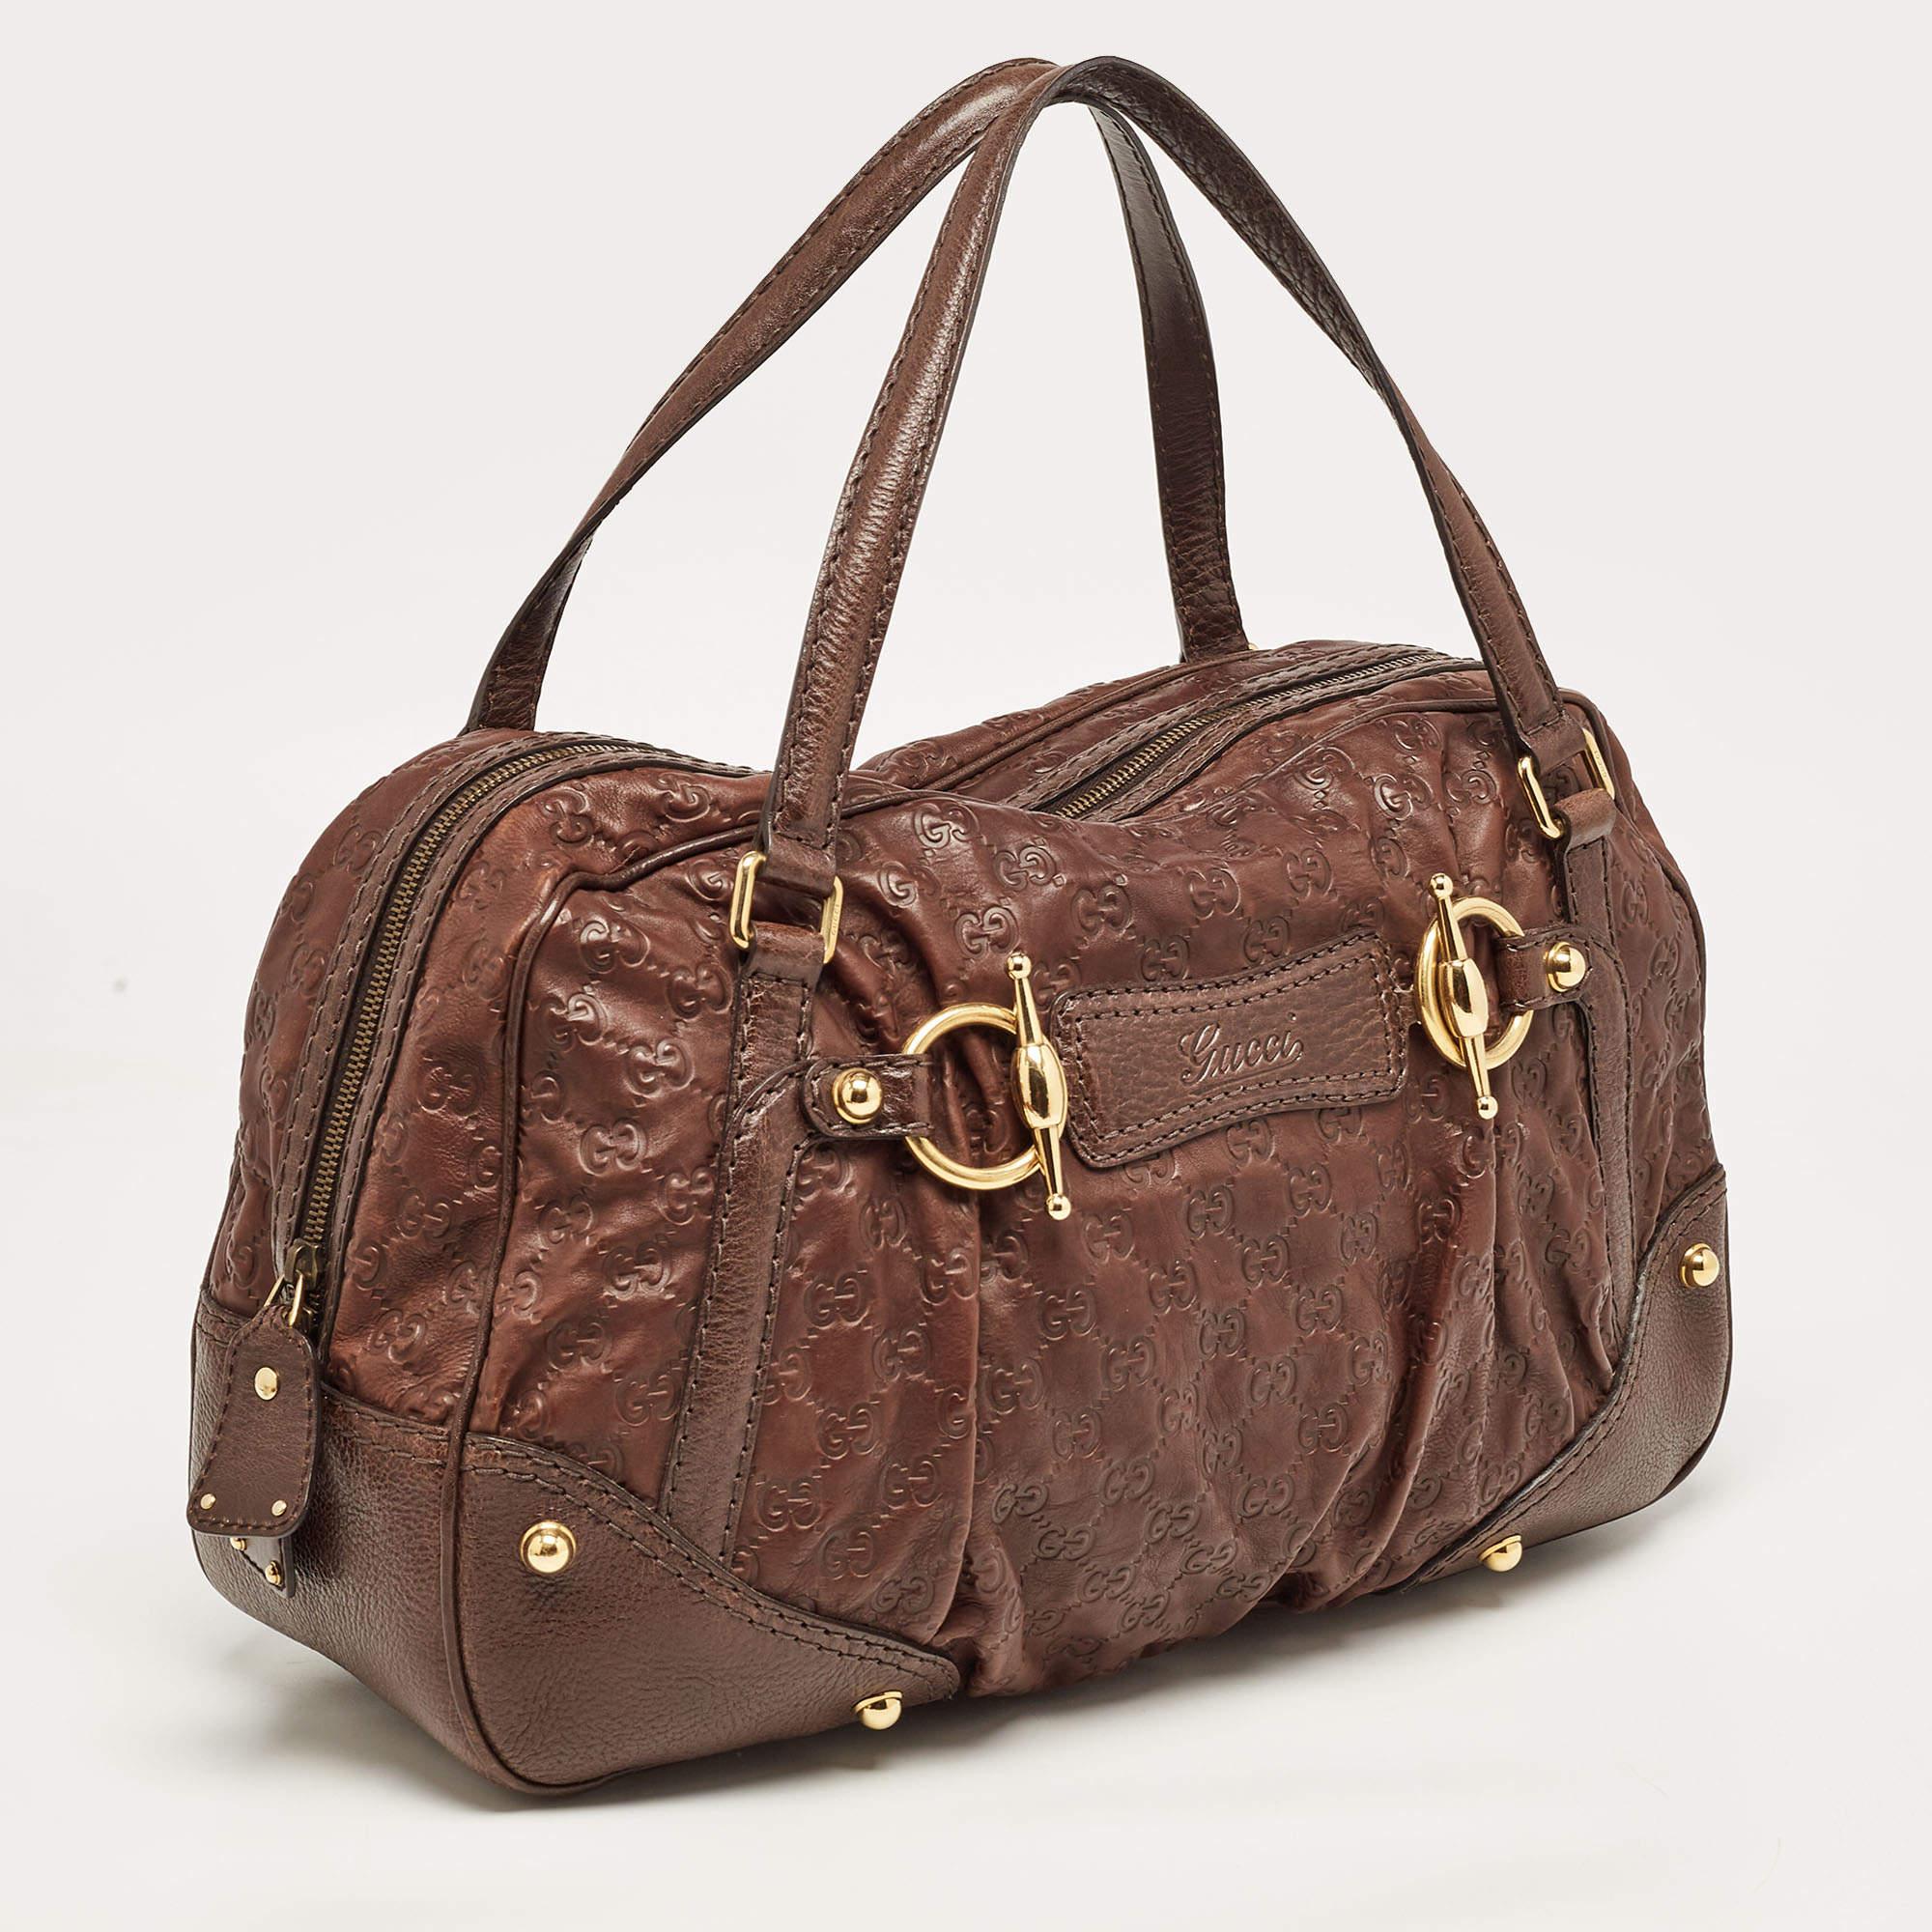 A timeless and elegant piece to add to your collection. Jockey Boston bag is designed with Guccissima leather. Roll on handles makes it easy for you to tote this bag in your arms. Gold-tone hardware works well on the dark brown contrast combination.